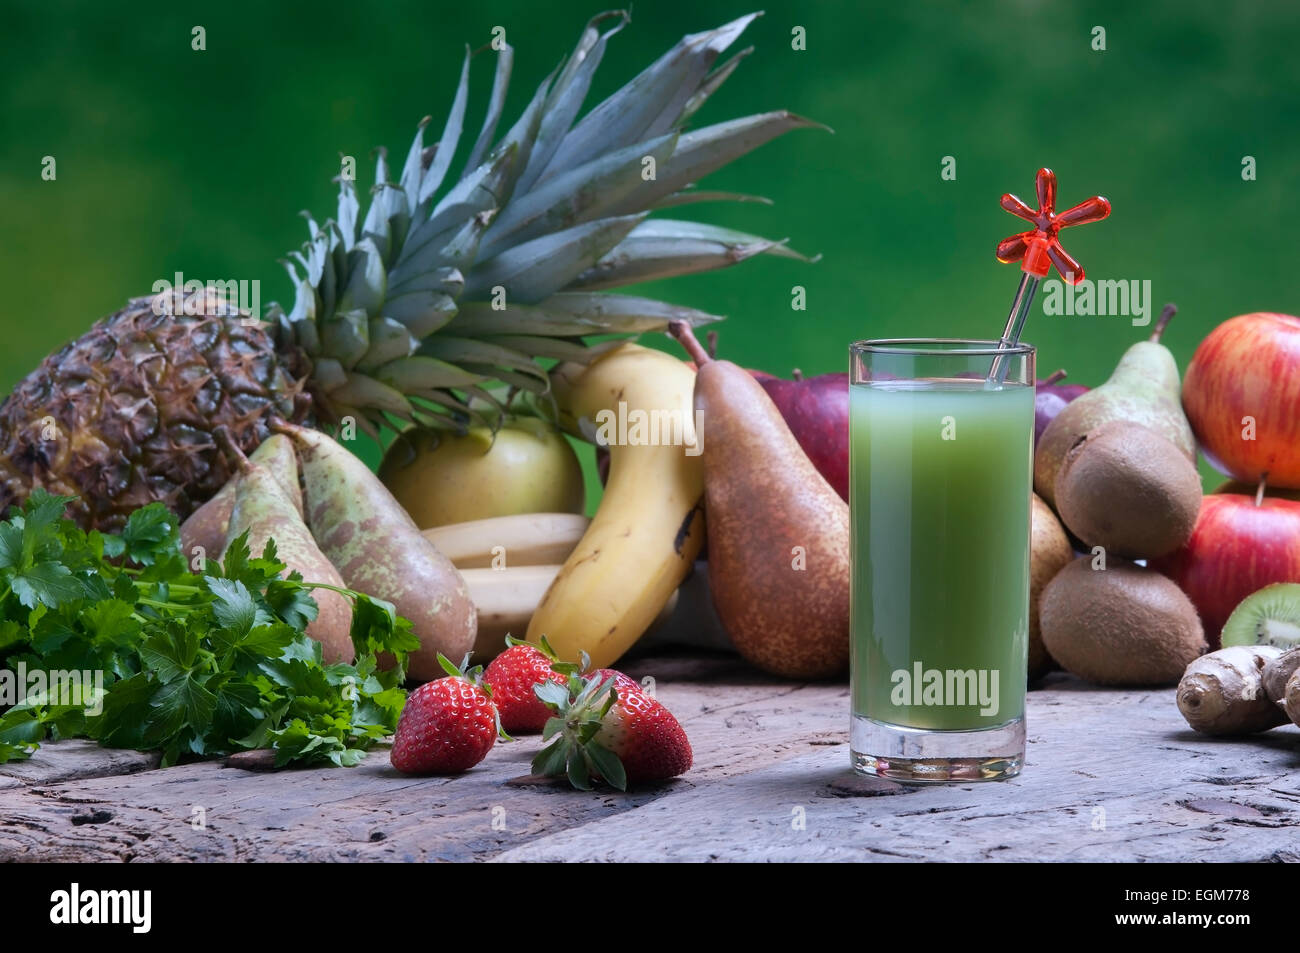 mixed fruit on a wooden board ready for juices and juice Stock Photo